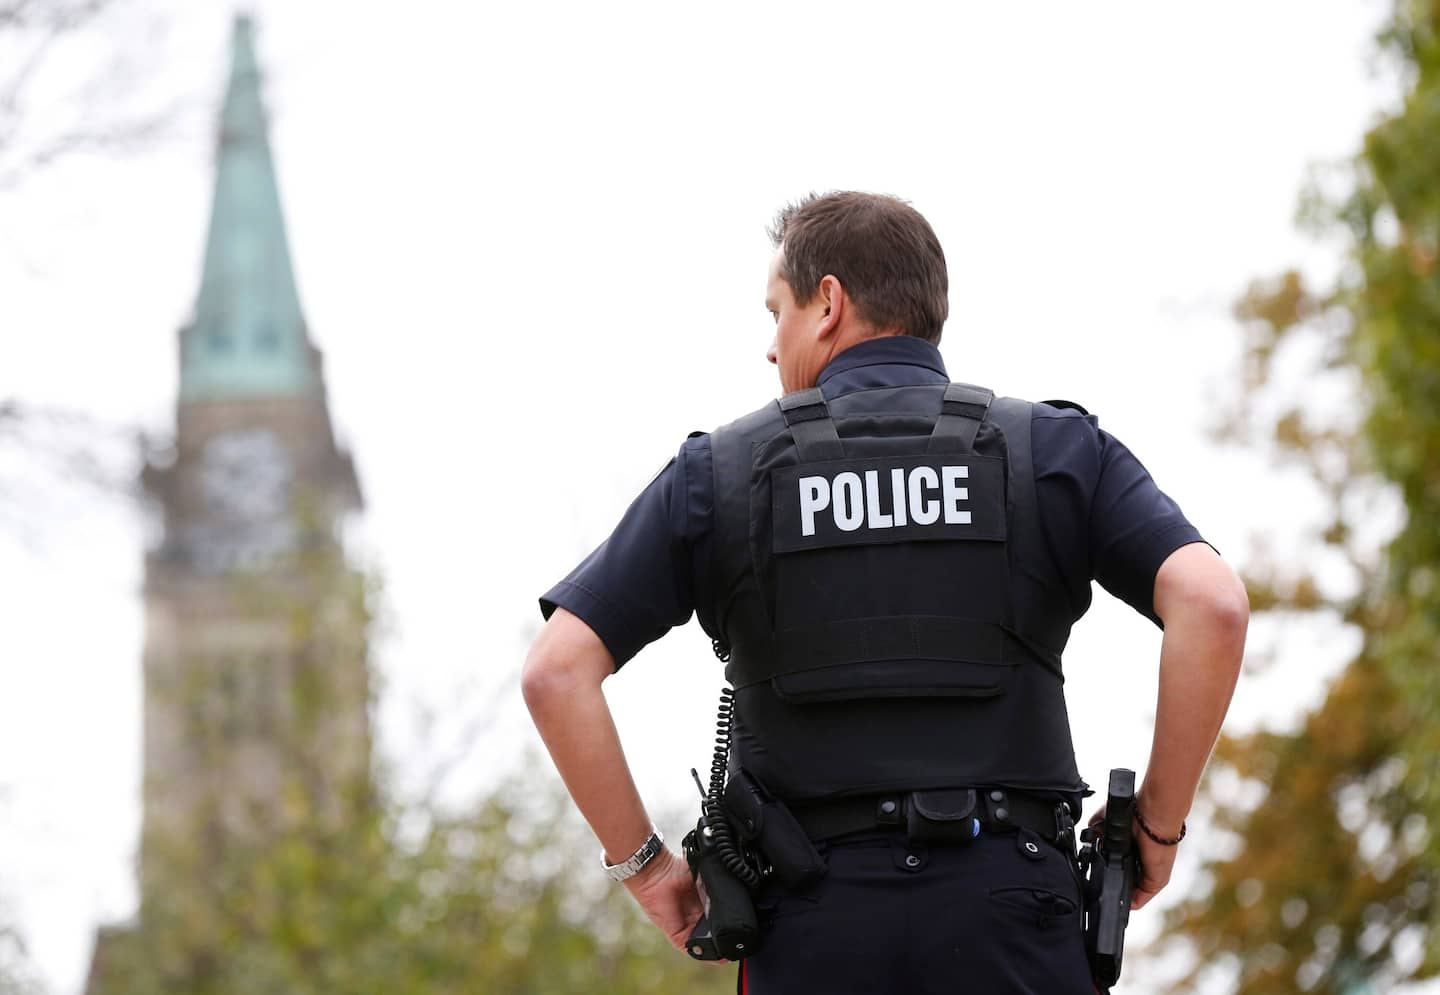 Police officer killed in Ontario: Quebec police chiefs demand legislative changes